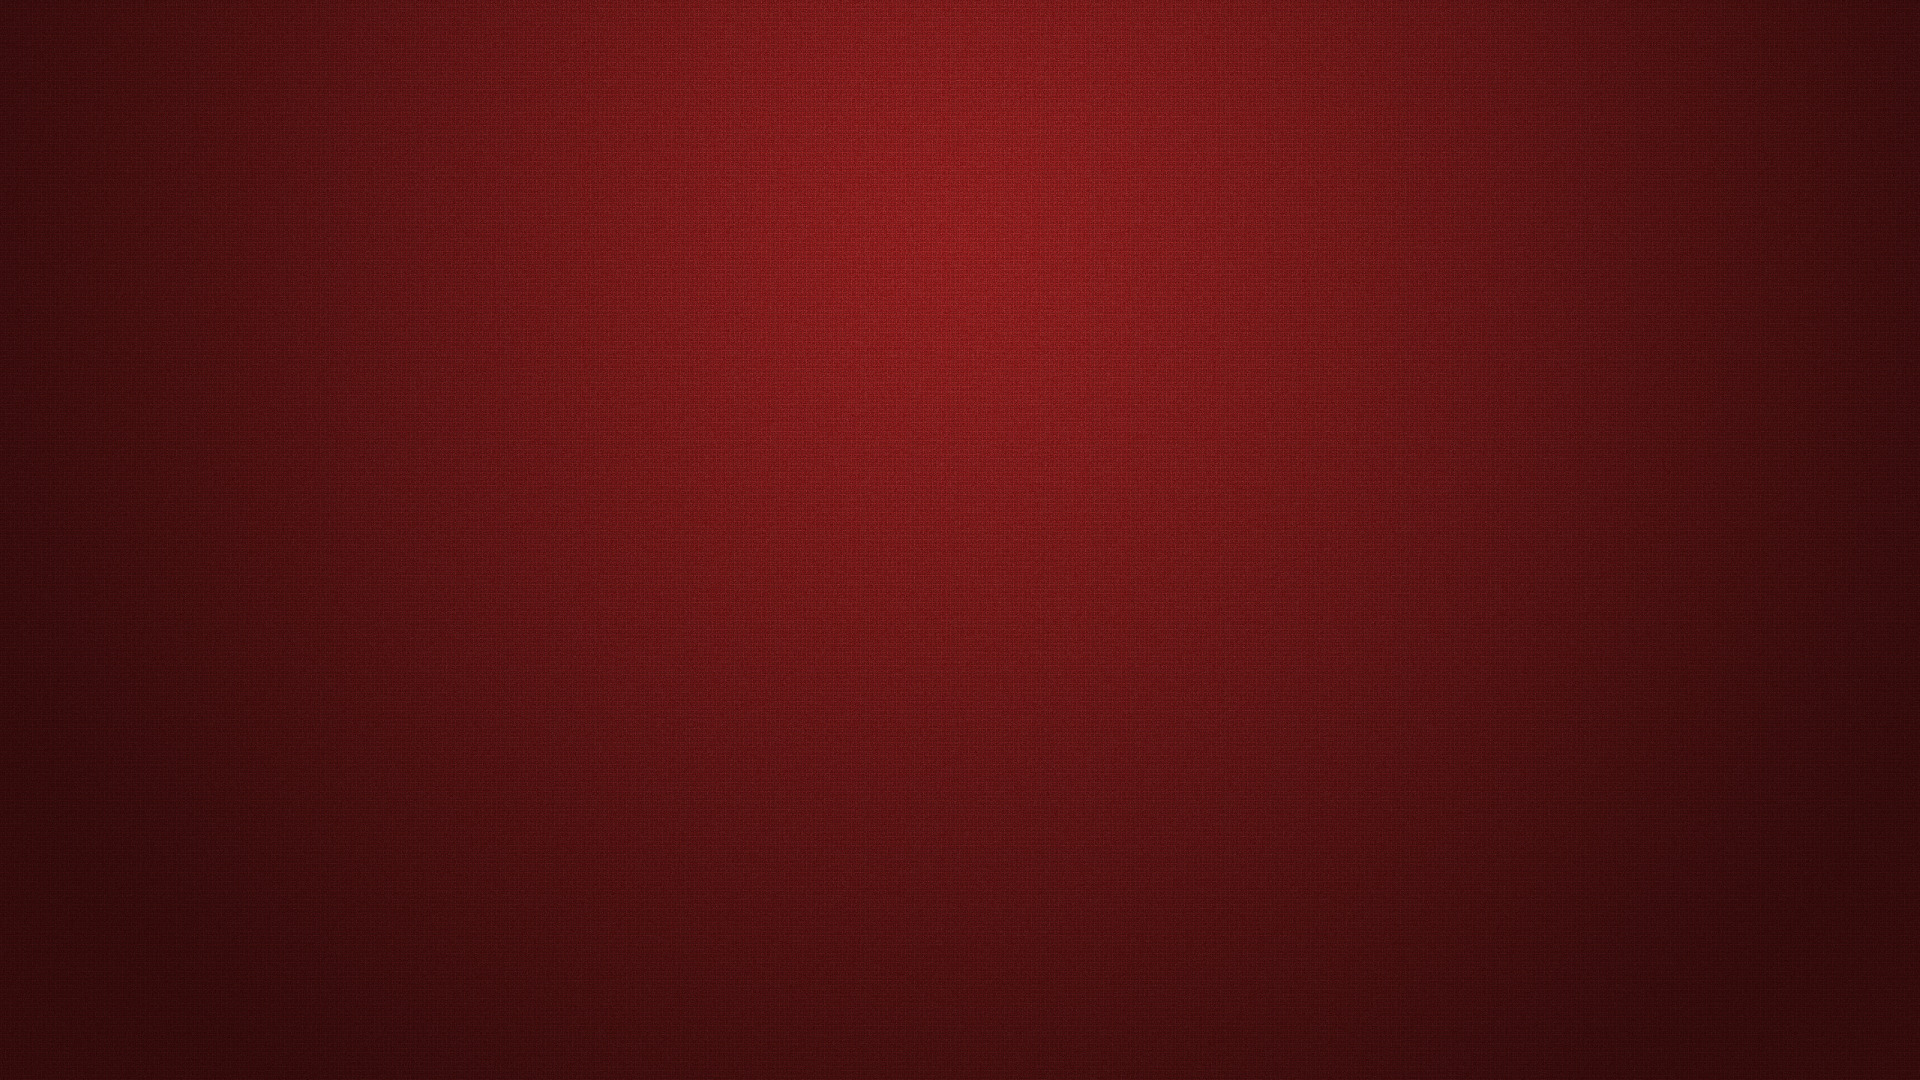 HD wallpaper red background texture backgrounds abstract pattern  textured  Wallpaper Flare